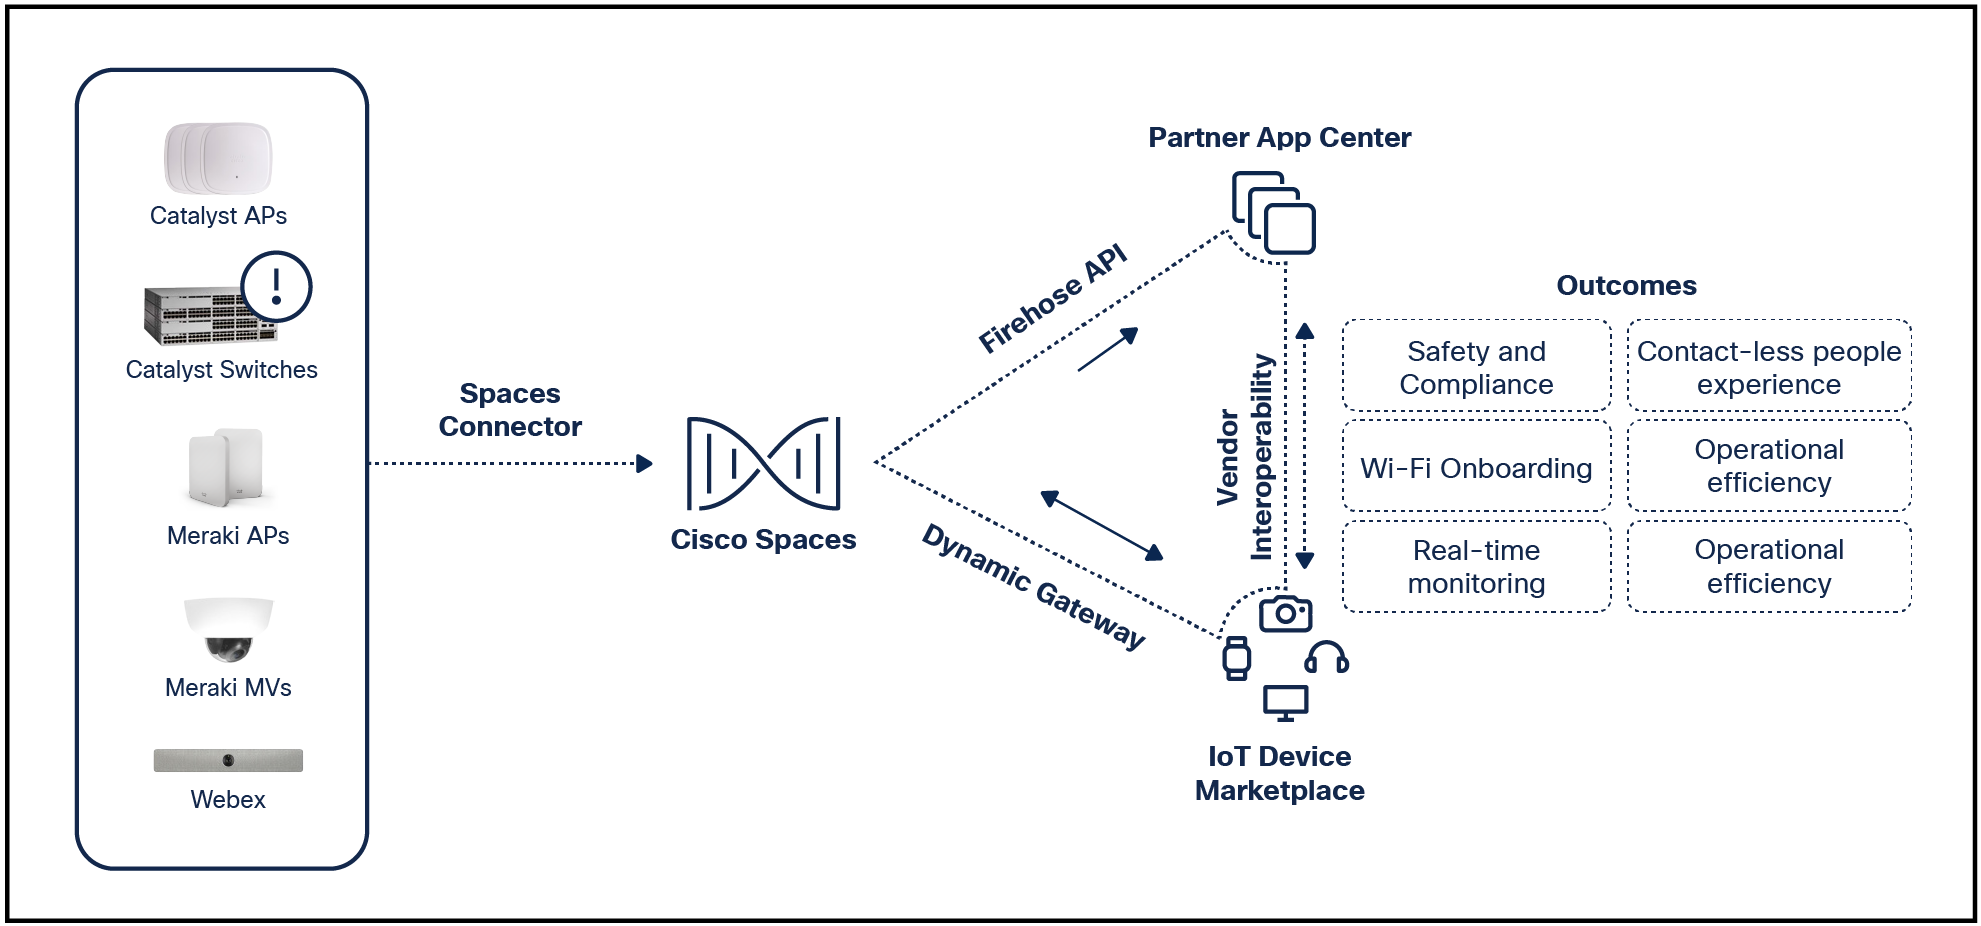 Whether Cisco Catalyst or Meraki, all location data is able to by synthesized via Cisco DNA Spaces to deliver location-based services